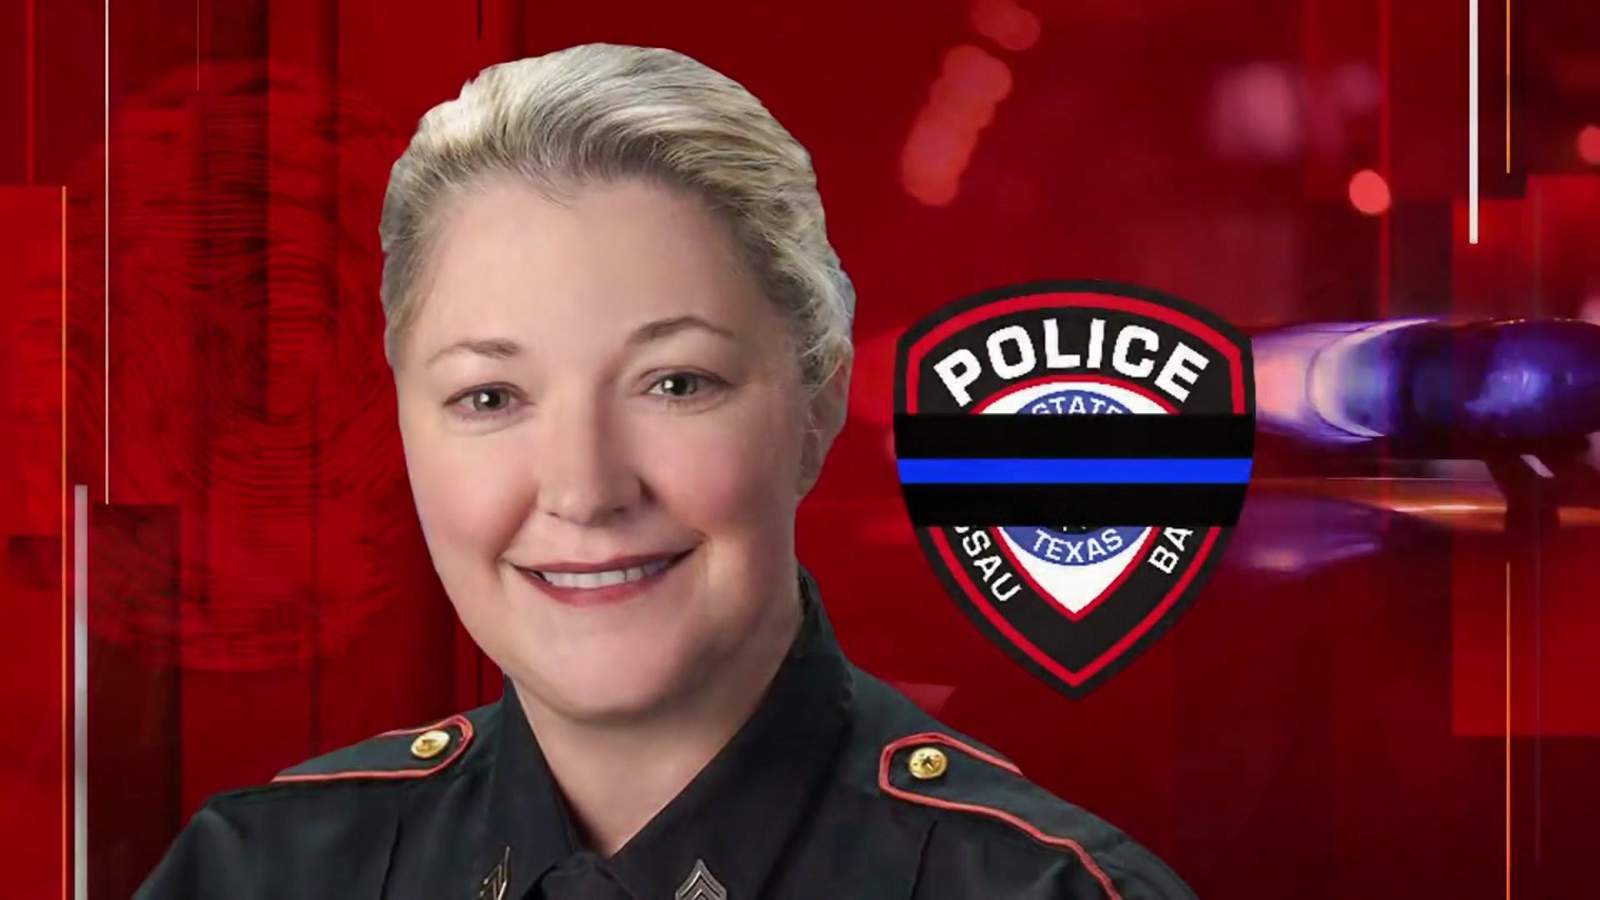 WeekHack: Funeral for fallen Nassau Bay Sgt. Kaila Sullivan, Papa John’s fundraiser for Sgt. Christopher Brewster’s family and more Houston happenings this week